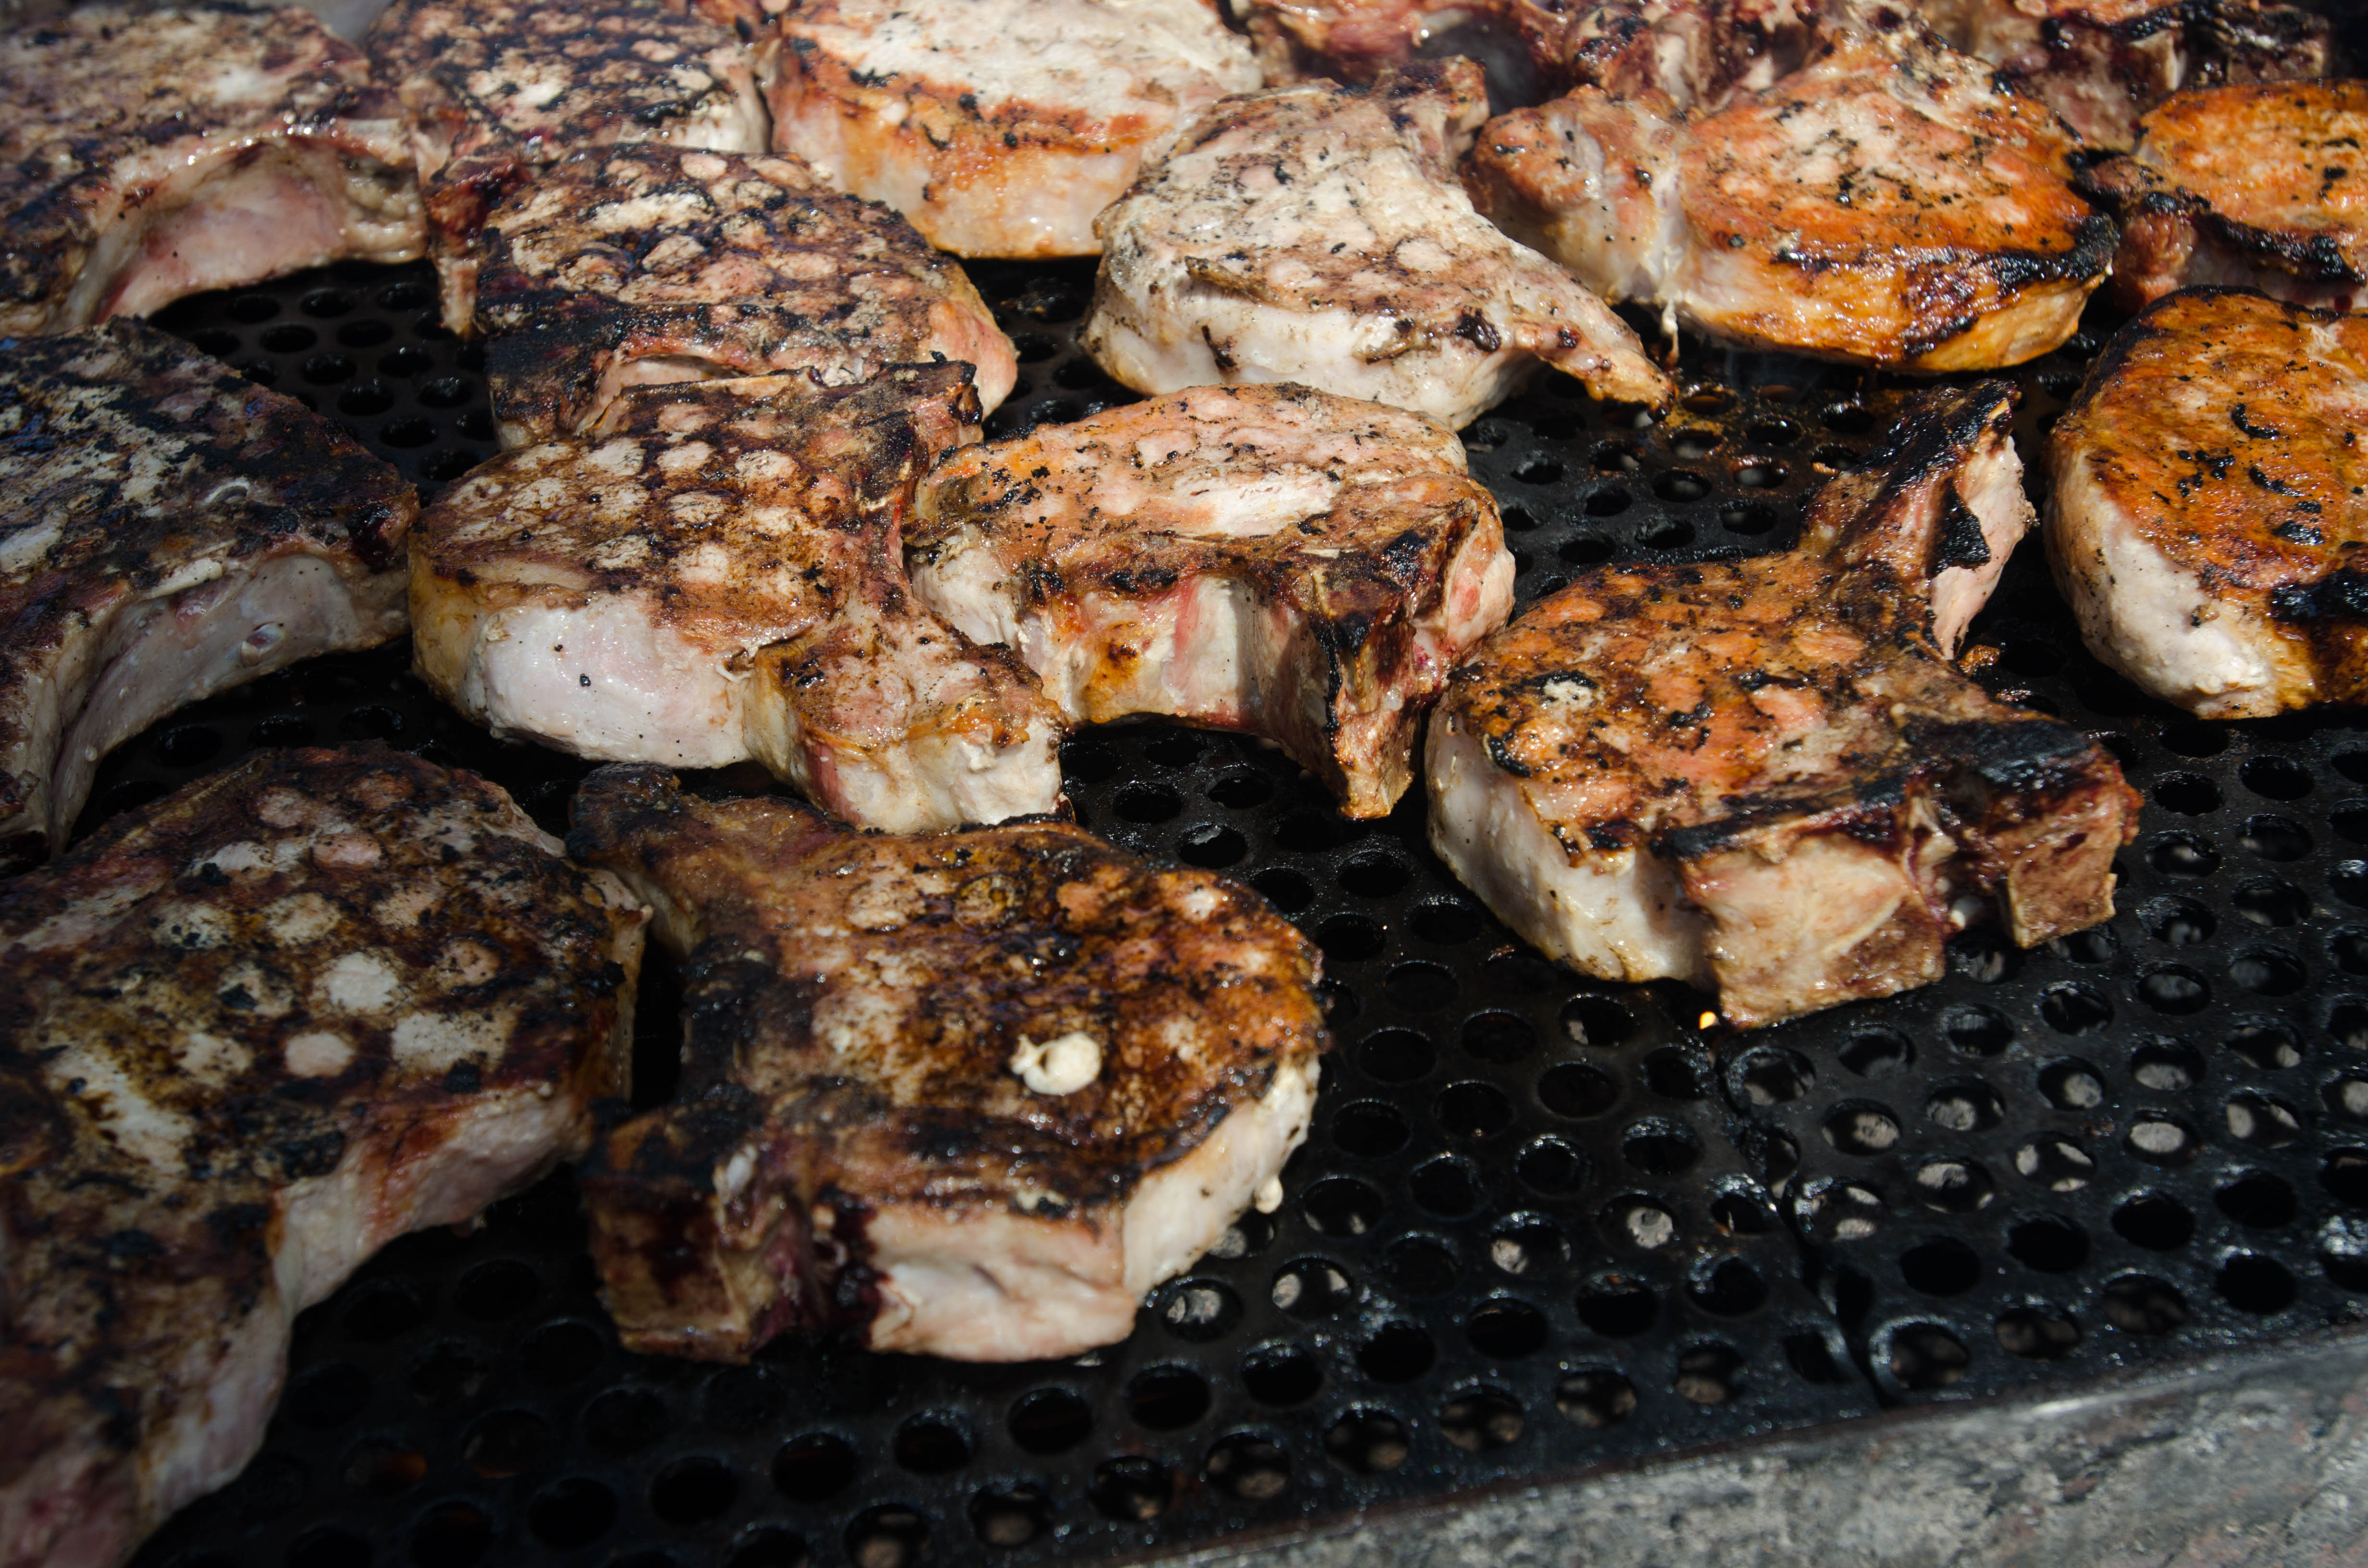 Pork cooks on a grill